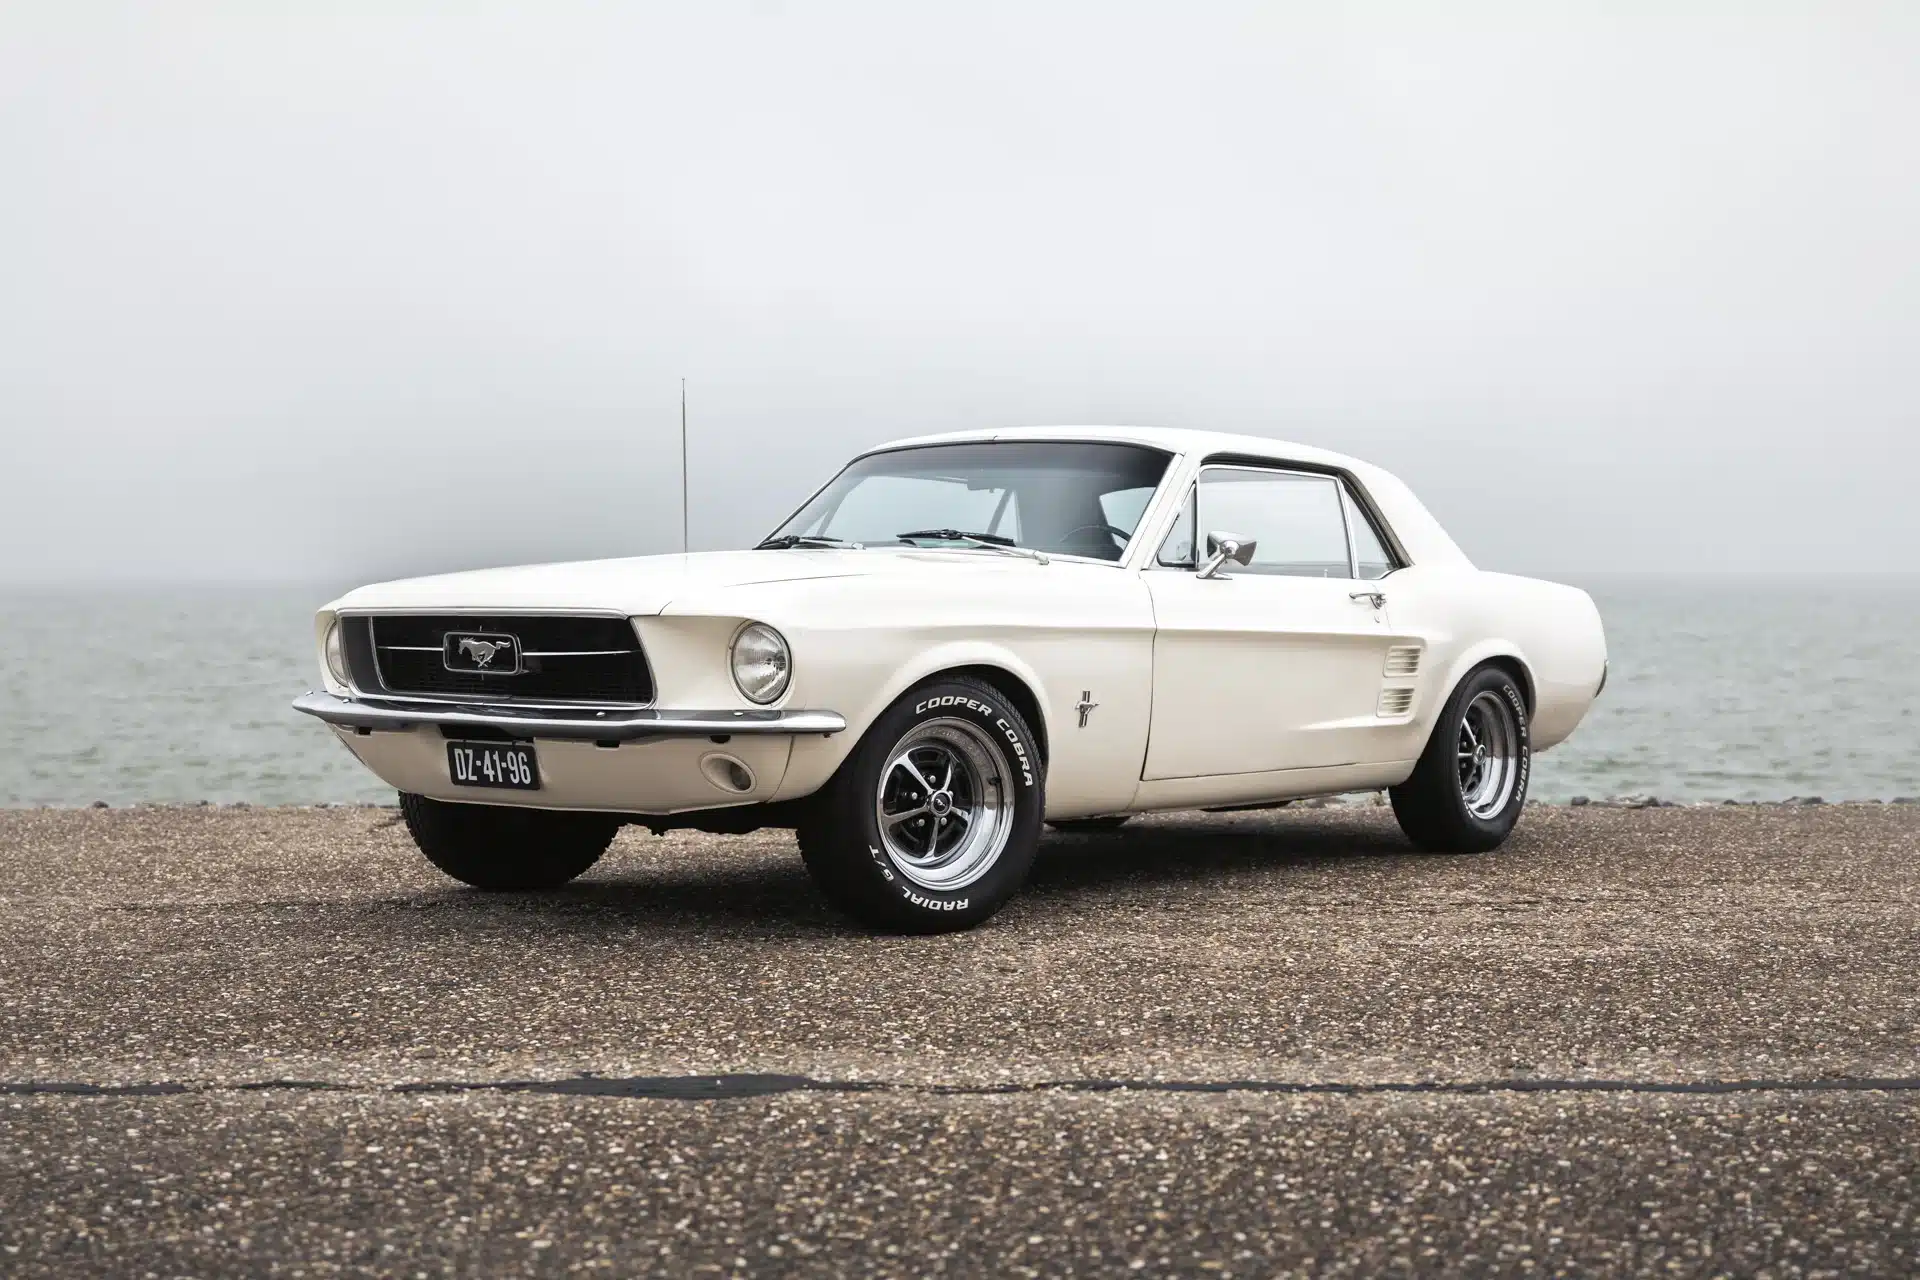 Ford mustang uit 1967